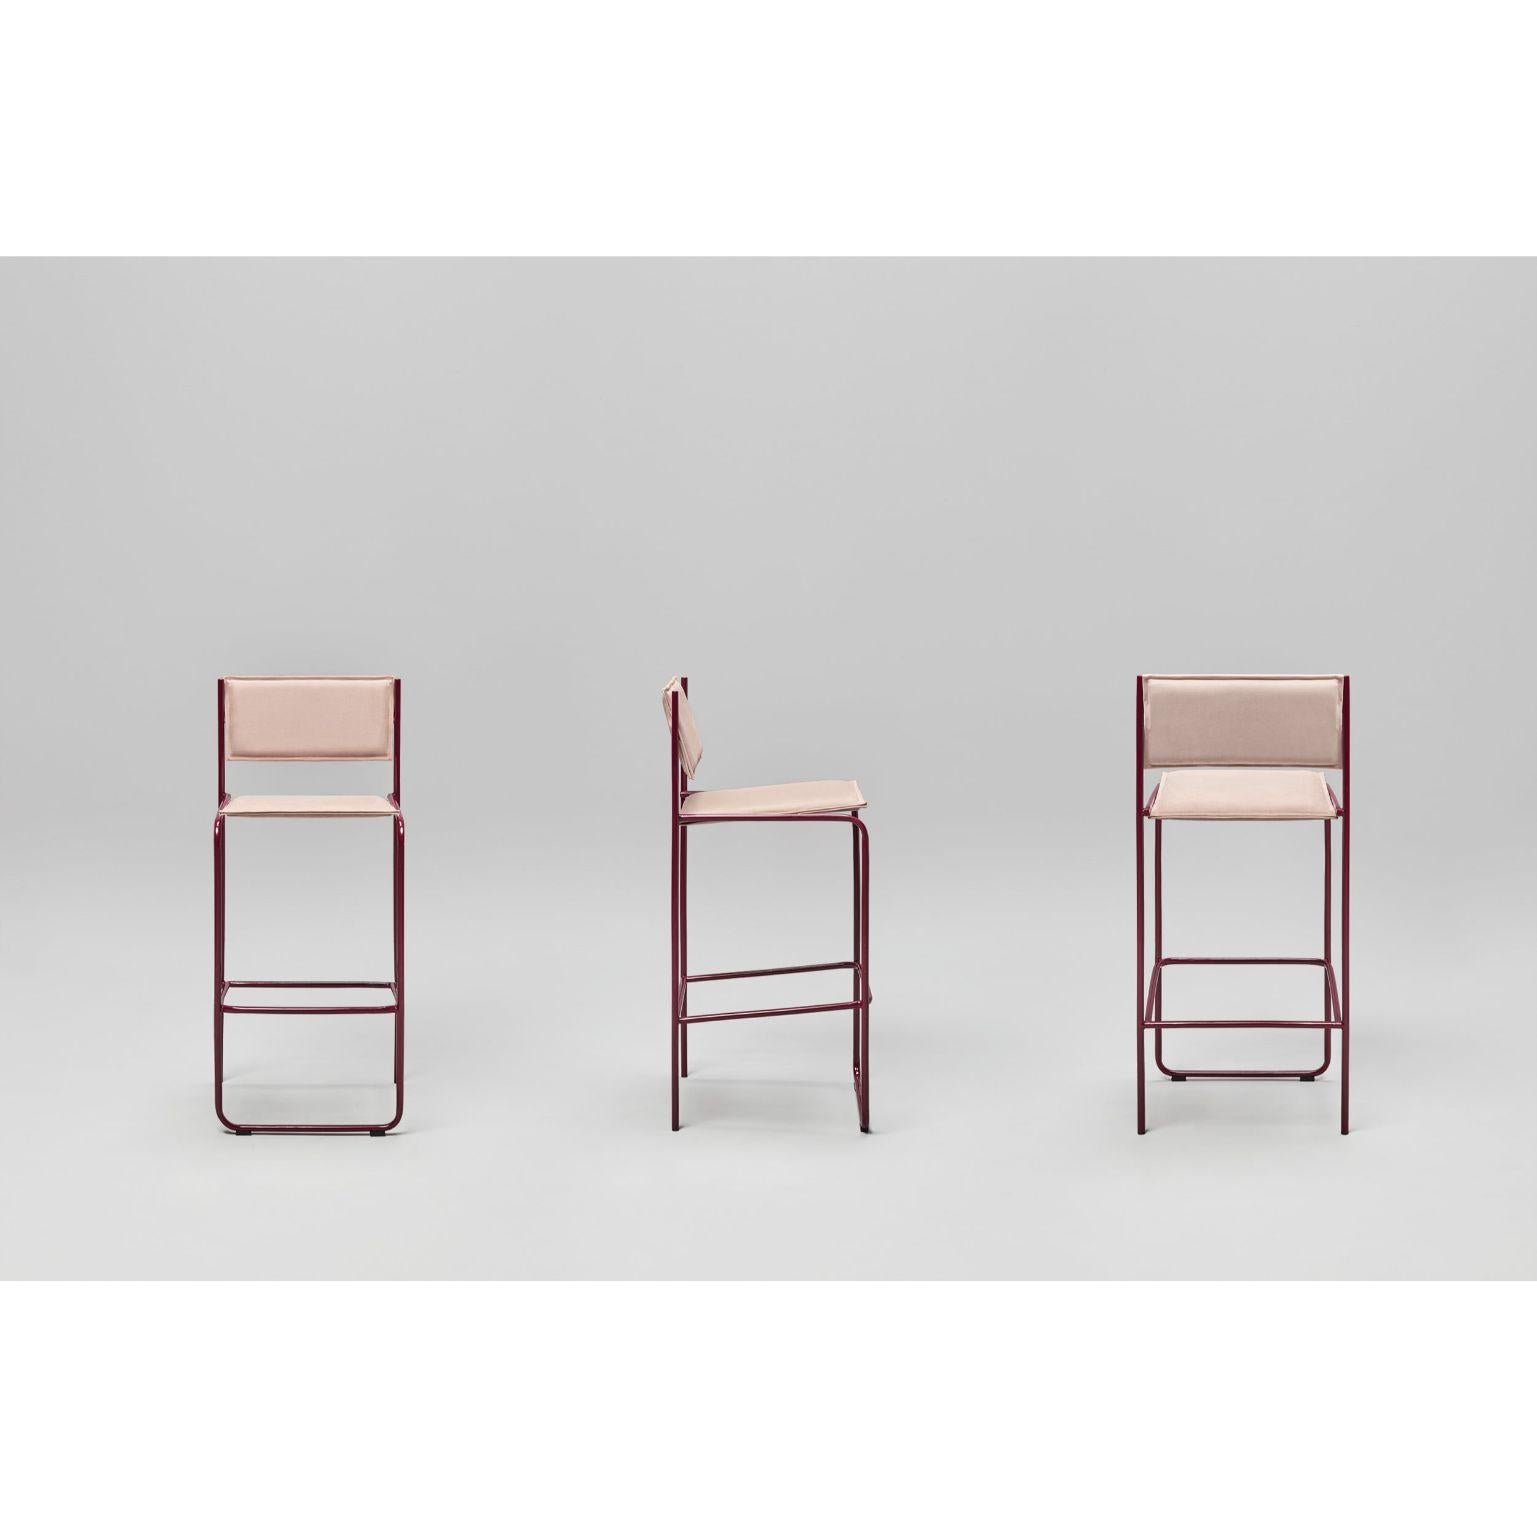 Trampolín Stool by Pepe Albargues
Dimensions: W47, D49, H103, Seat76
Materials: Chrome plated or painted iron structure
Foam CMHR (high resilience and flame retardant) for all our cushion filling systems
Removable backrest and seat covers
